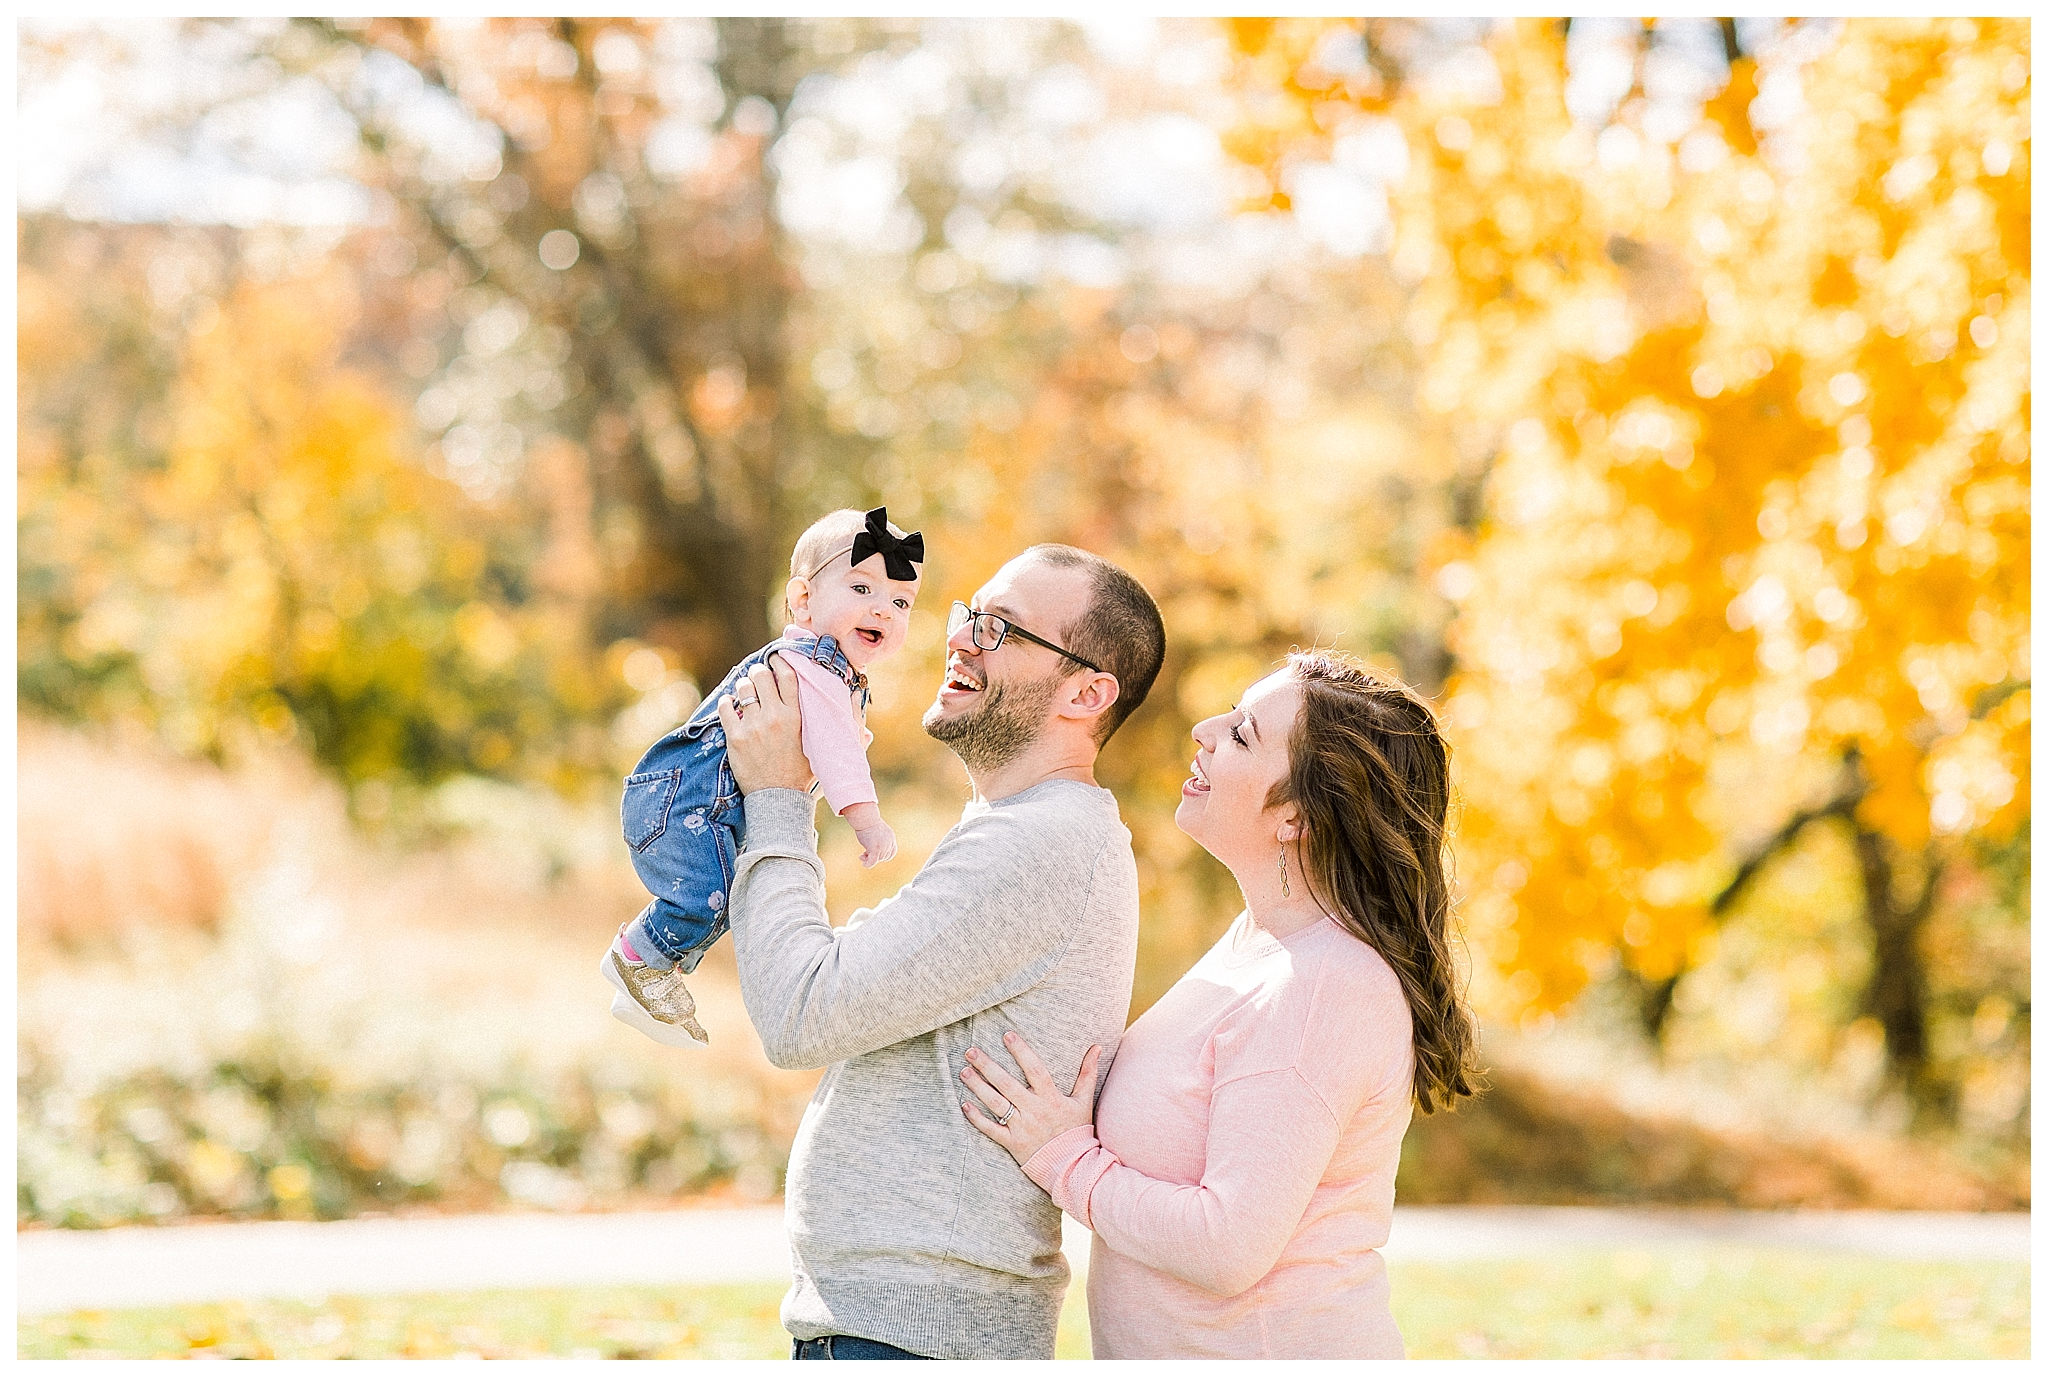 Valley Forge Park Family Session | Caroline Morris Photography